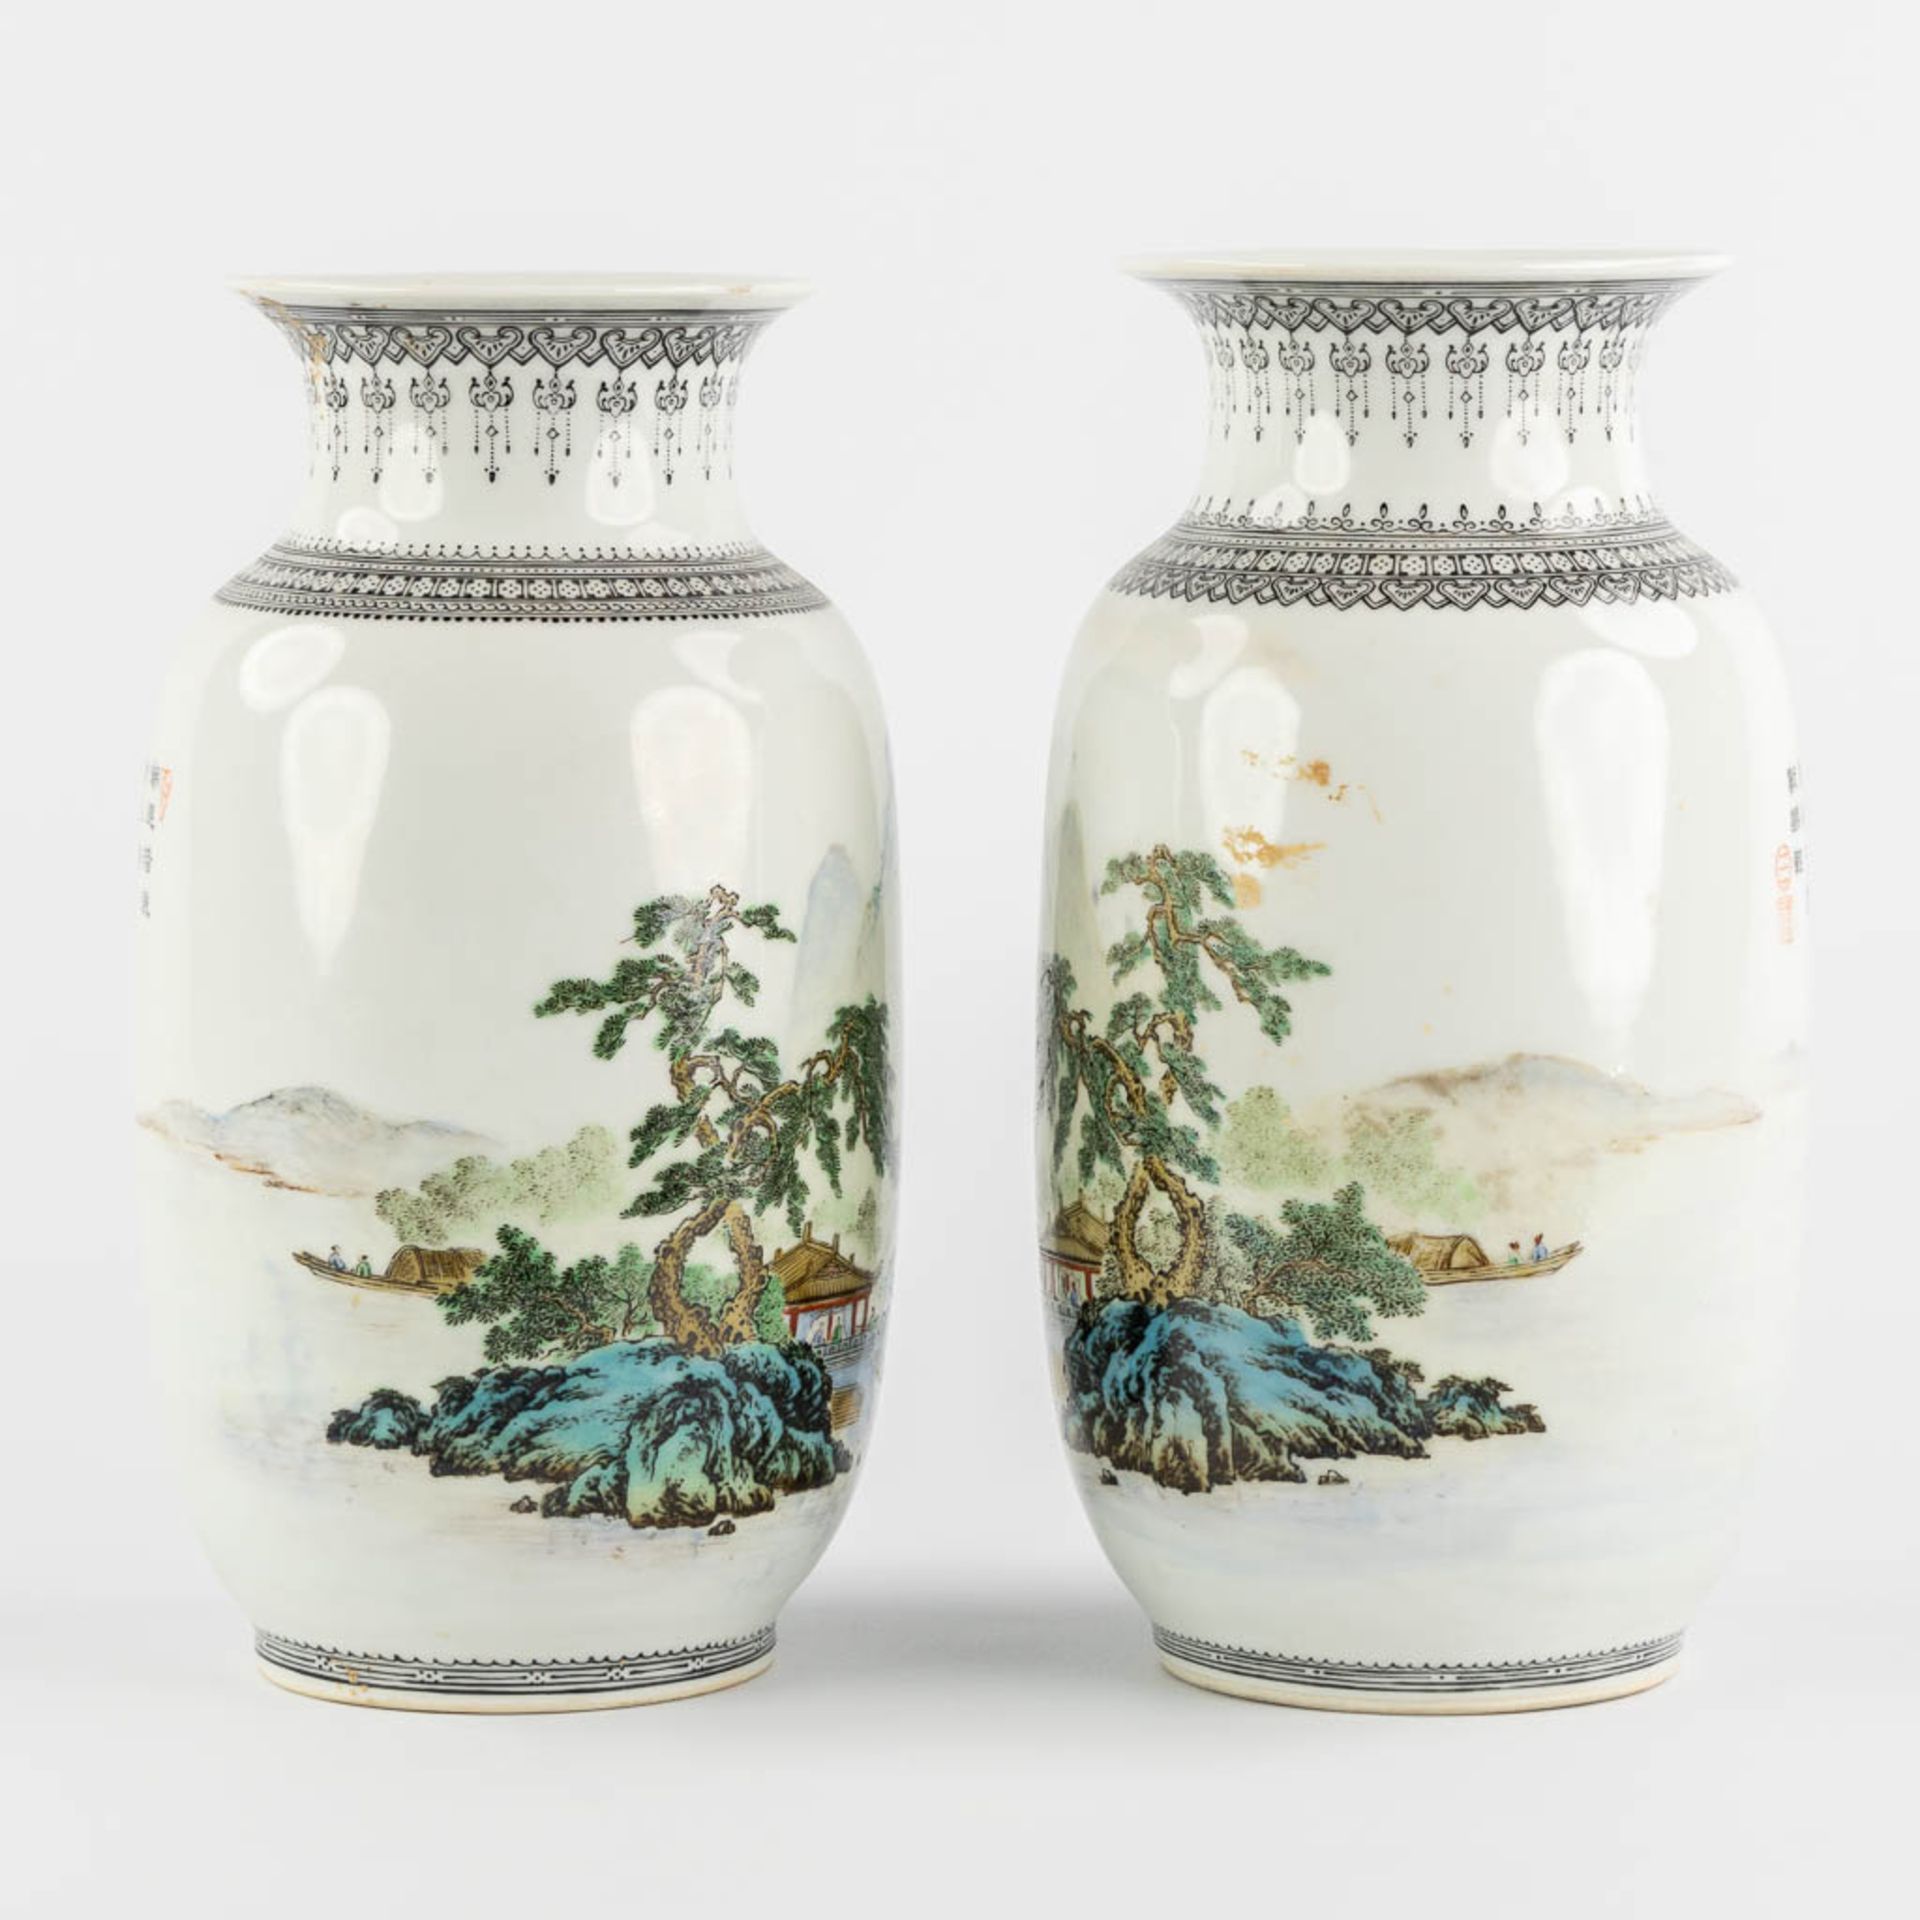 A pair of Chinese vases with a mountain landscape, 20th C. (H:24 x D:14 cm) - Image 3 of 12